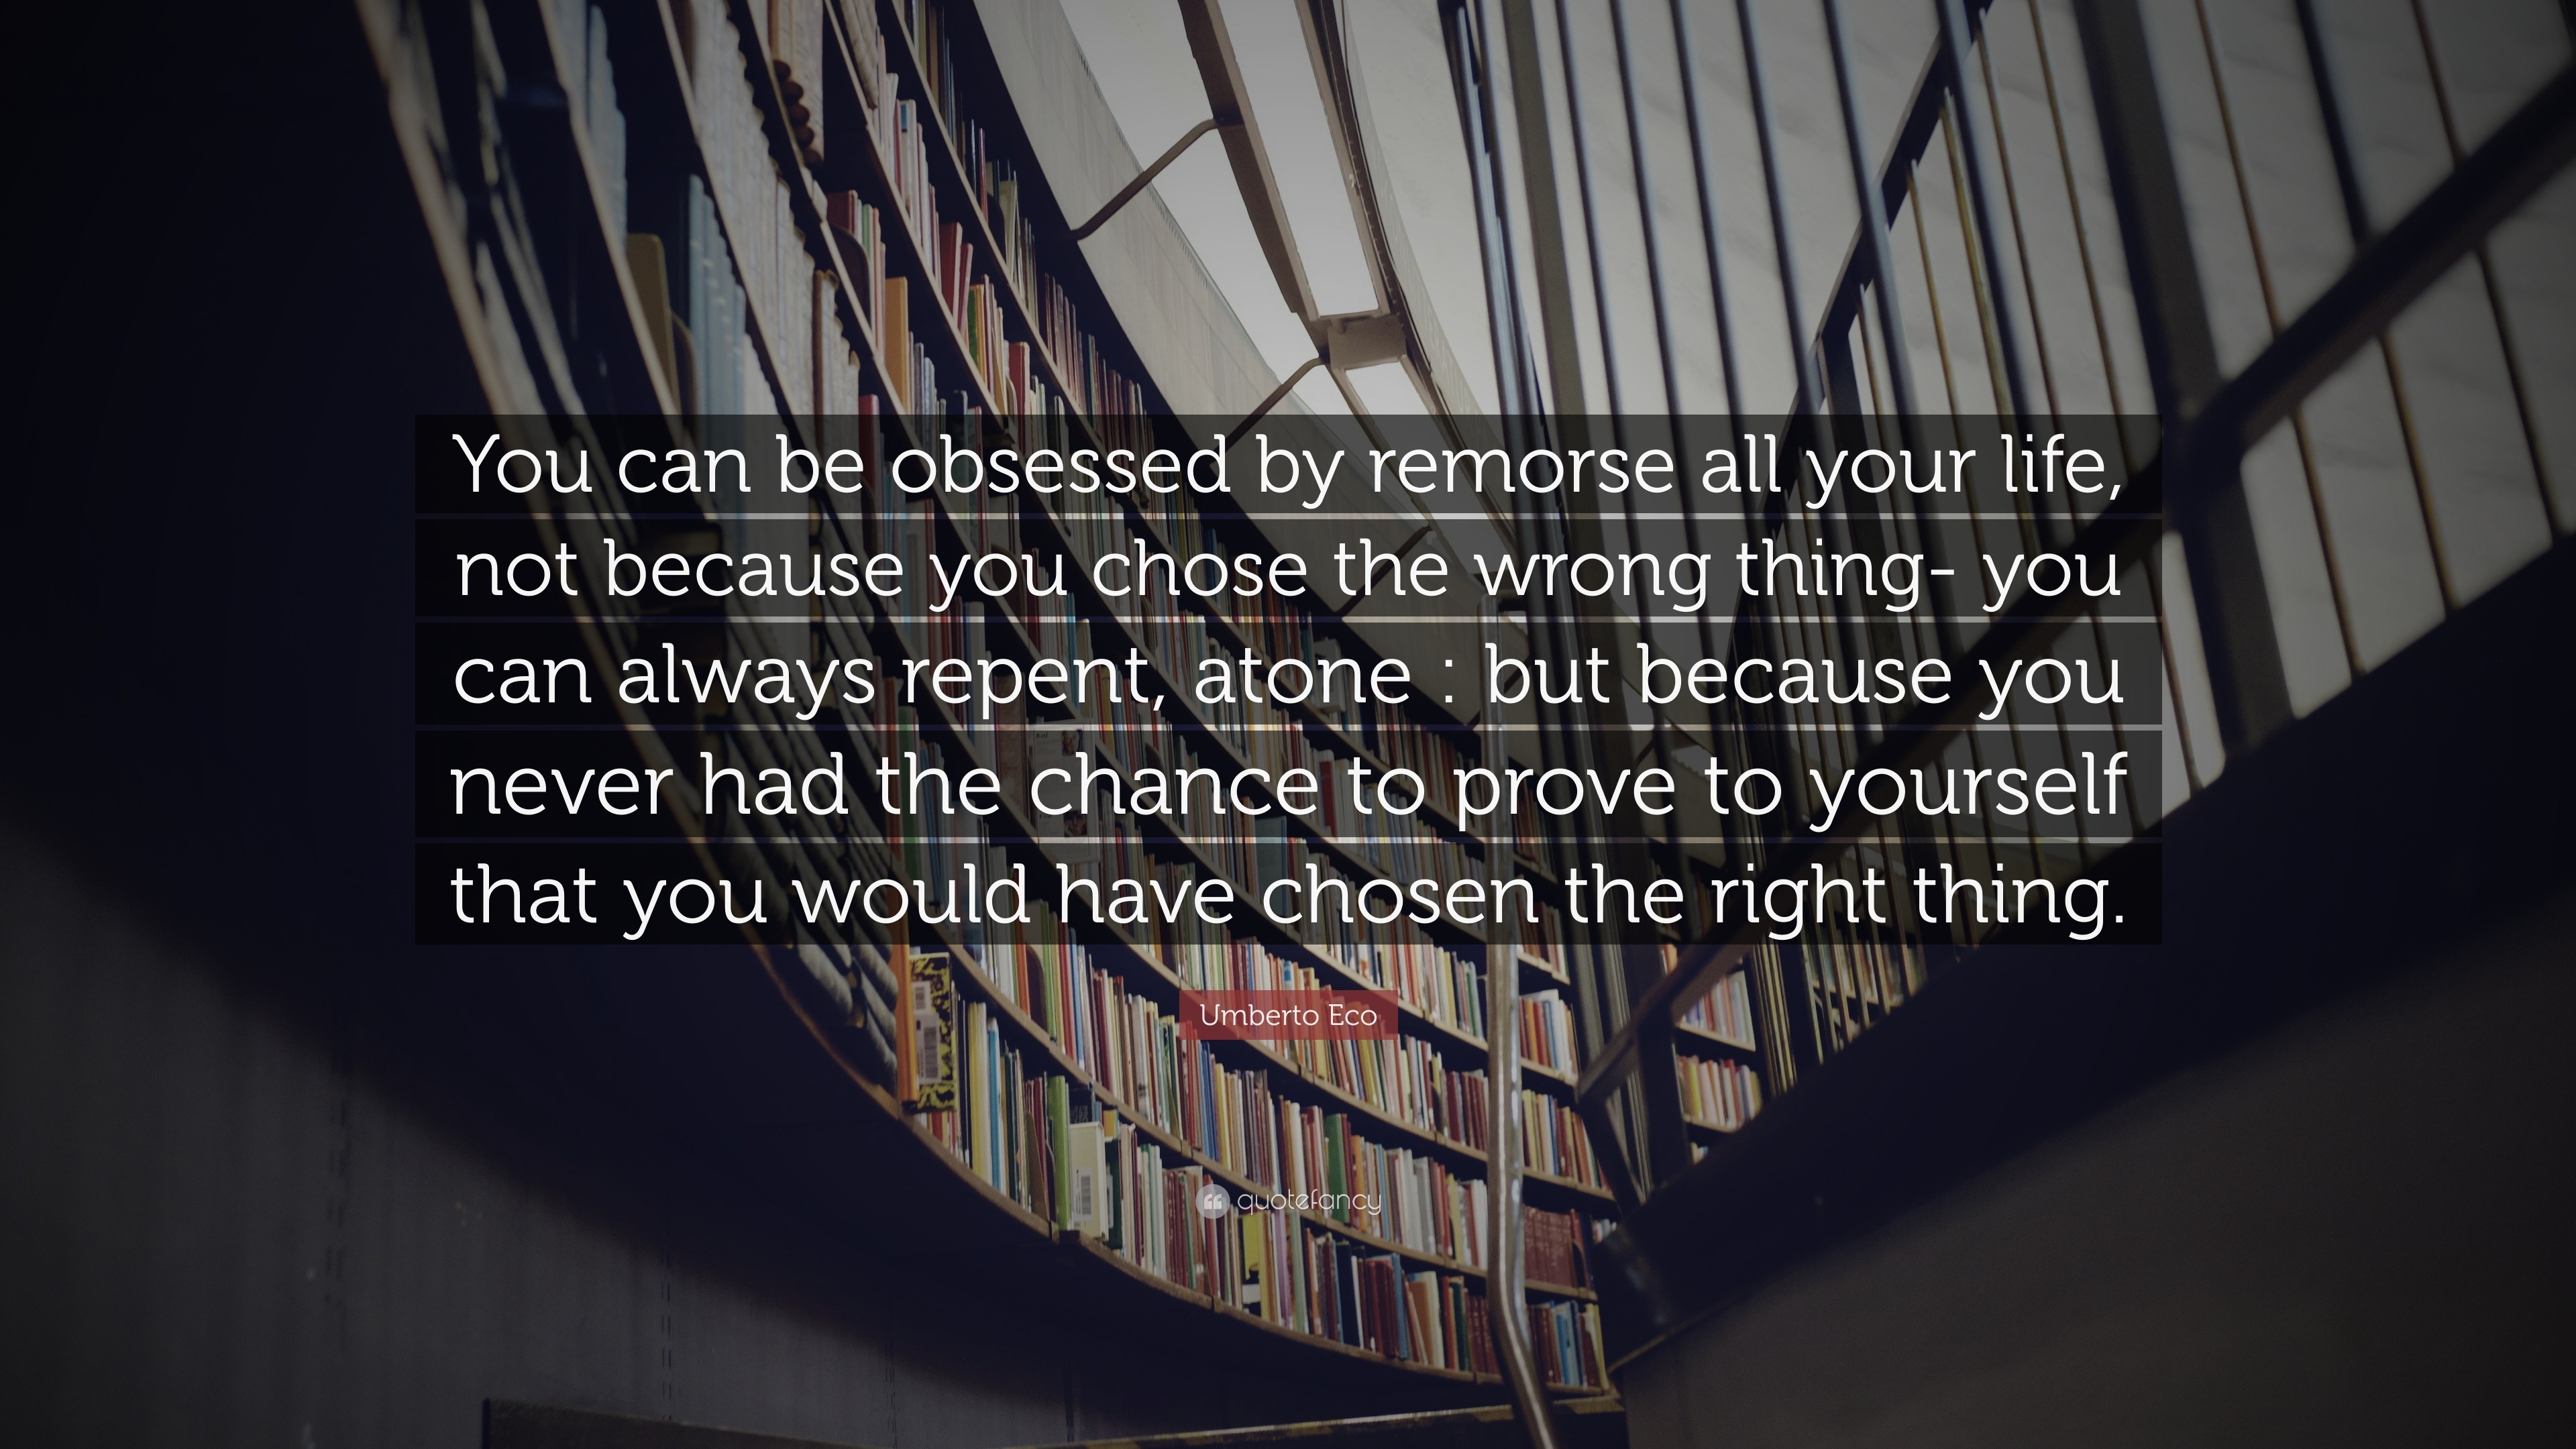 Umberto Eco Quote: “You can be obsessed by remorse all your life, not ...